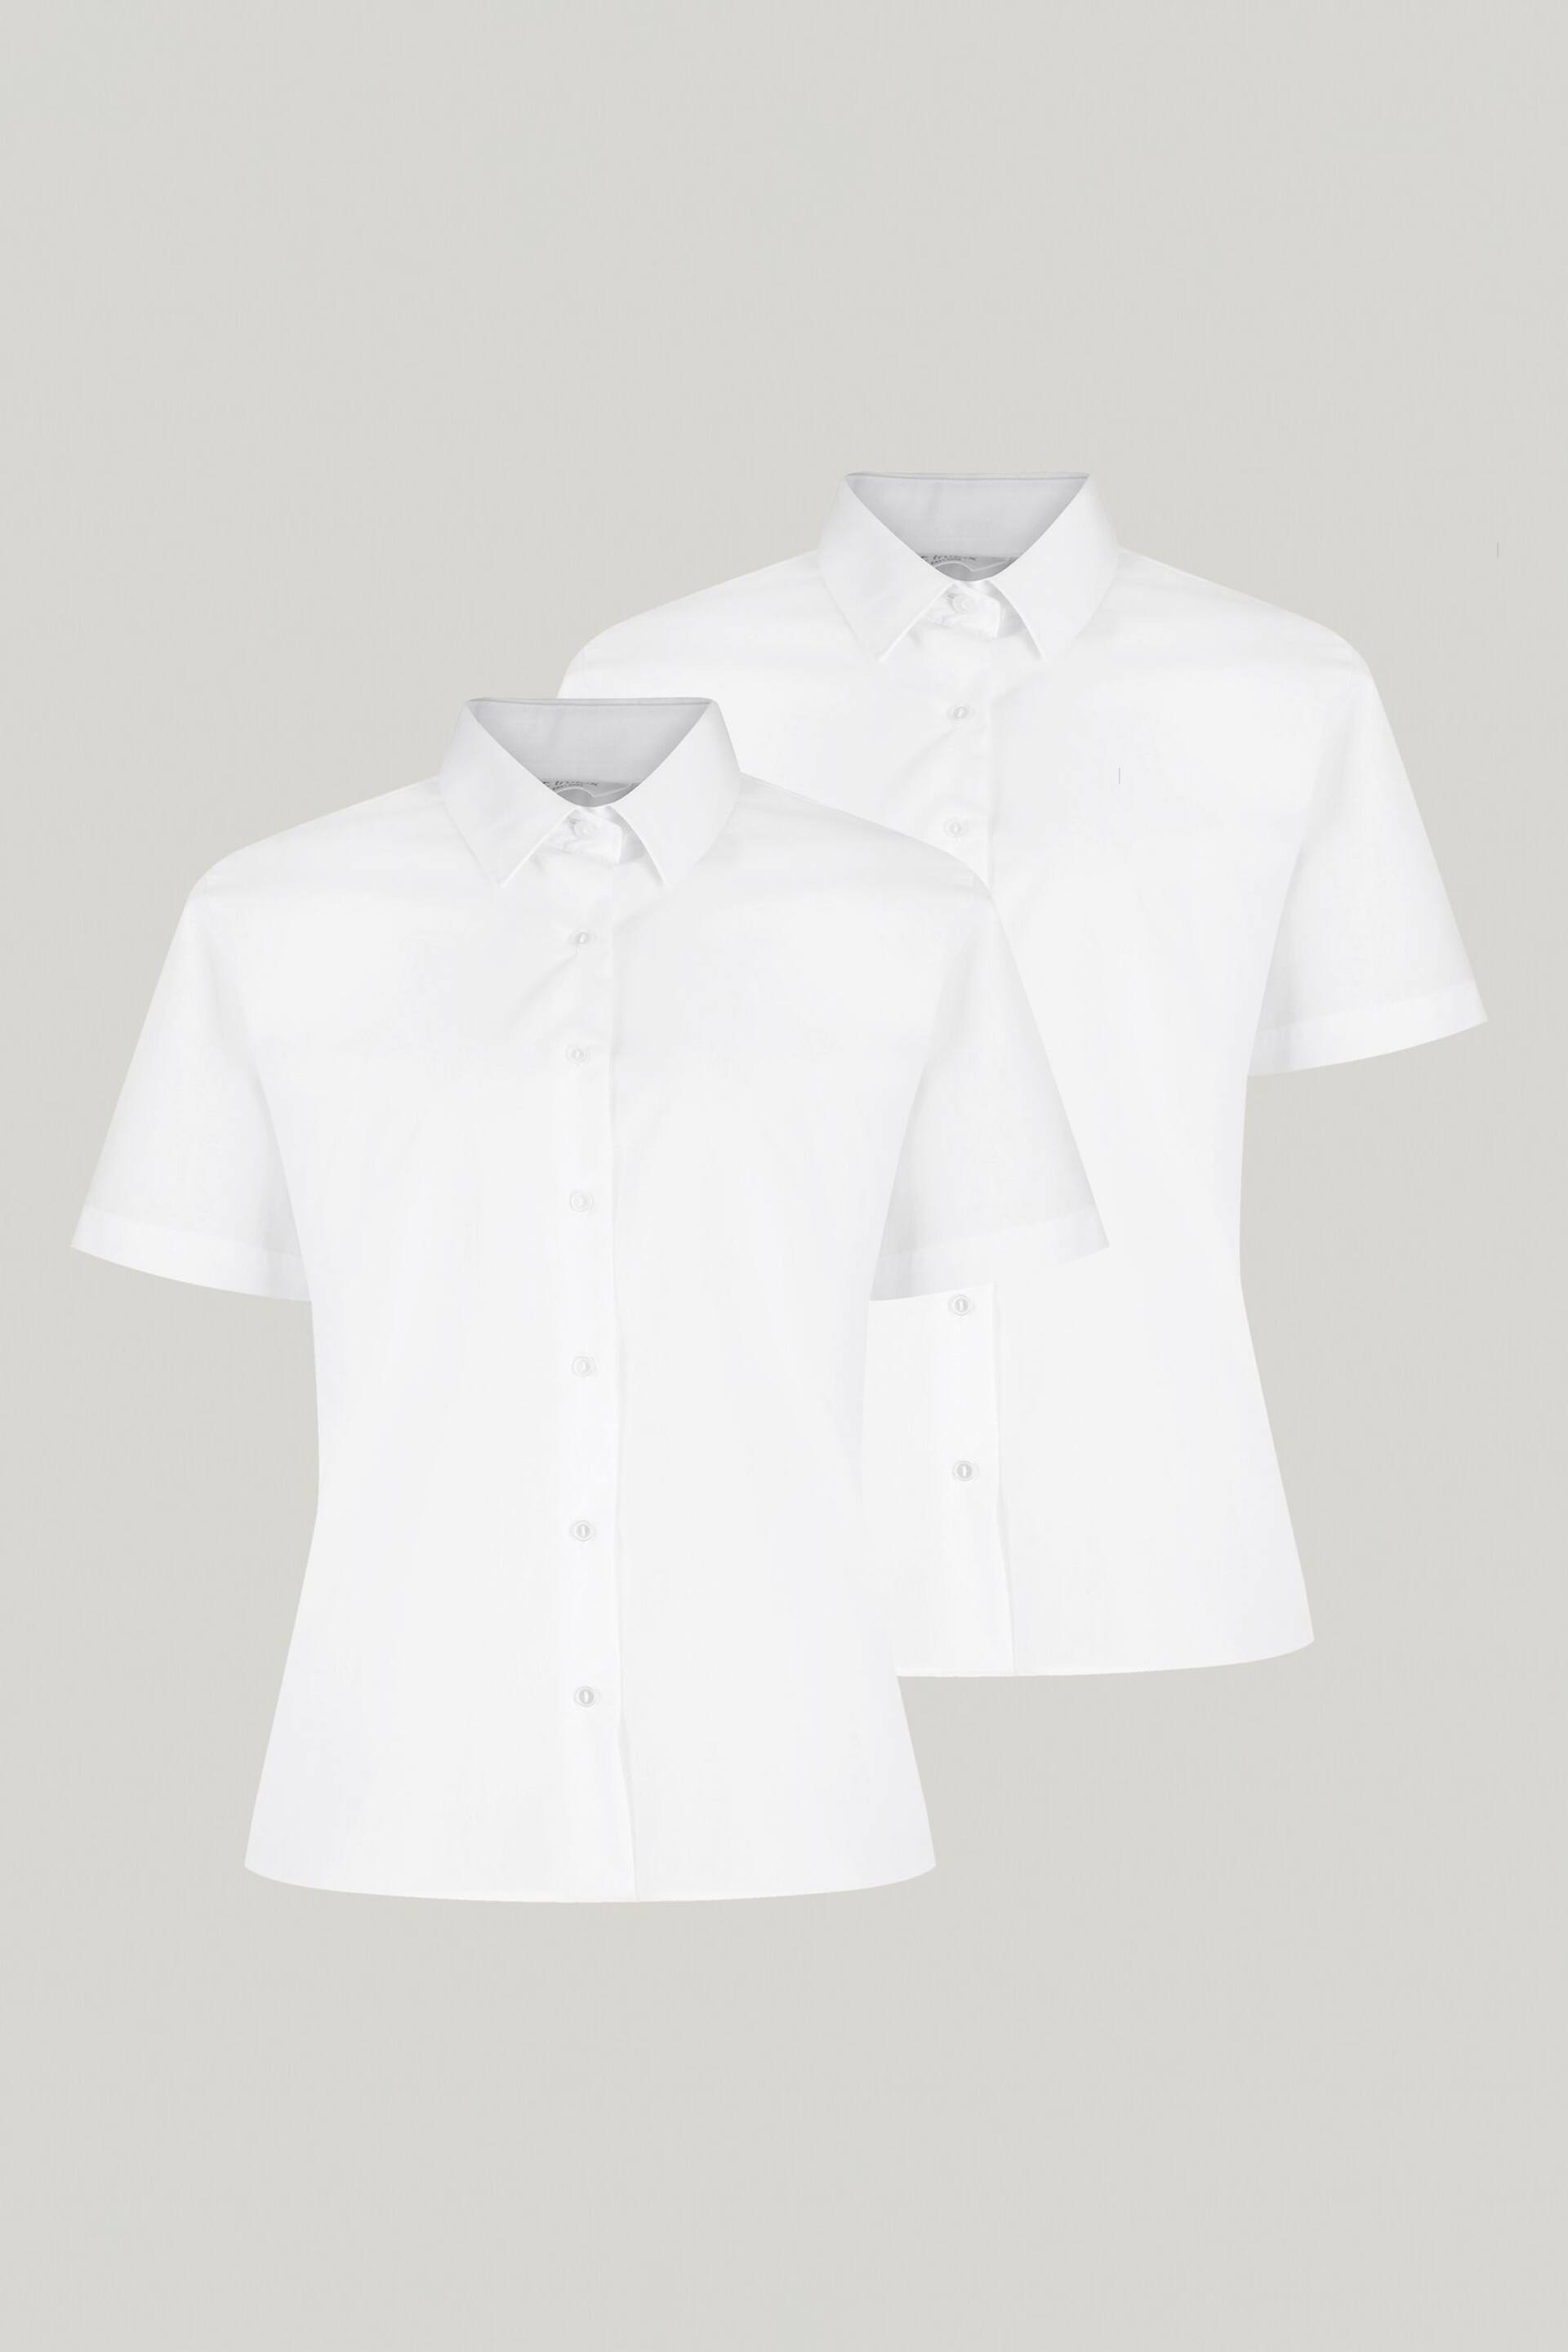 Trutex White Regular Fit Short Sleeve 2 Pack School Shirts - Image 2 of 7